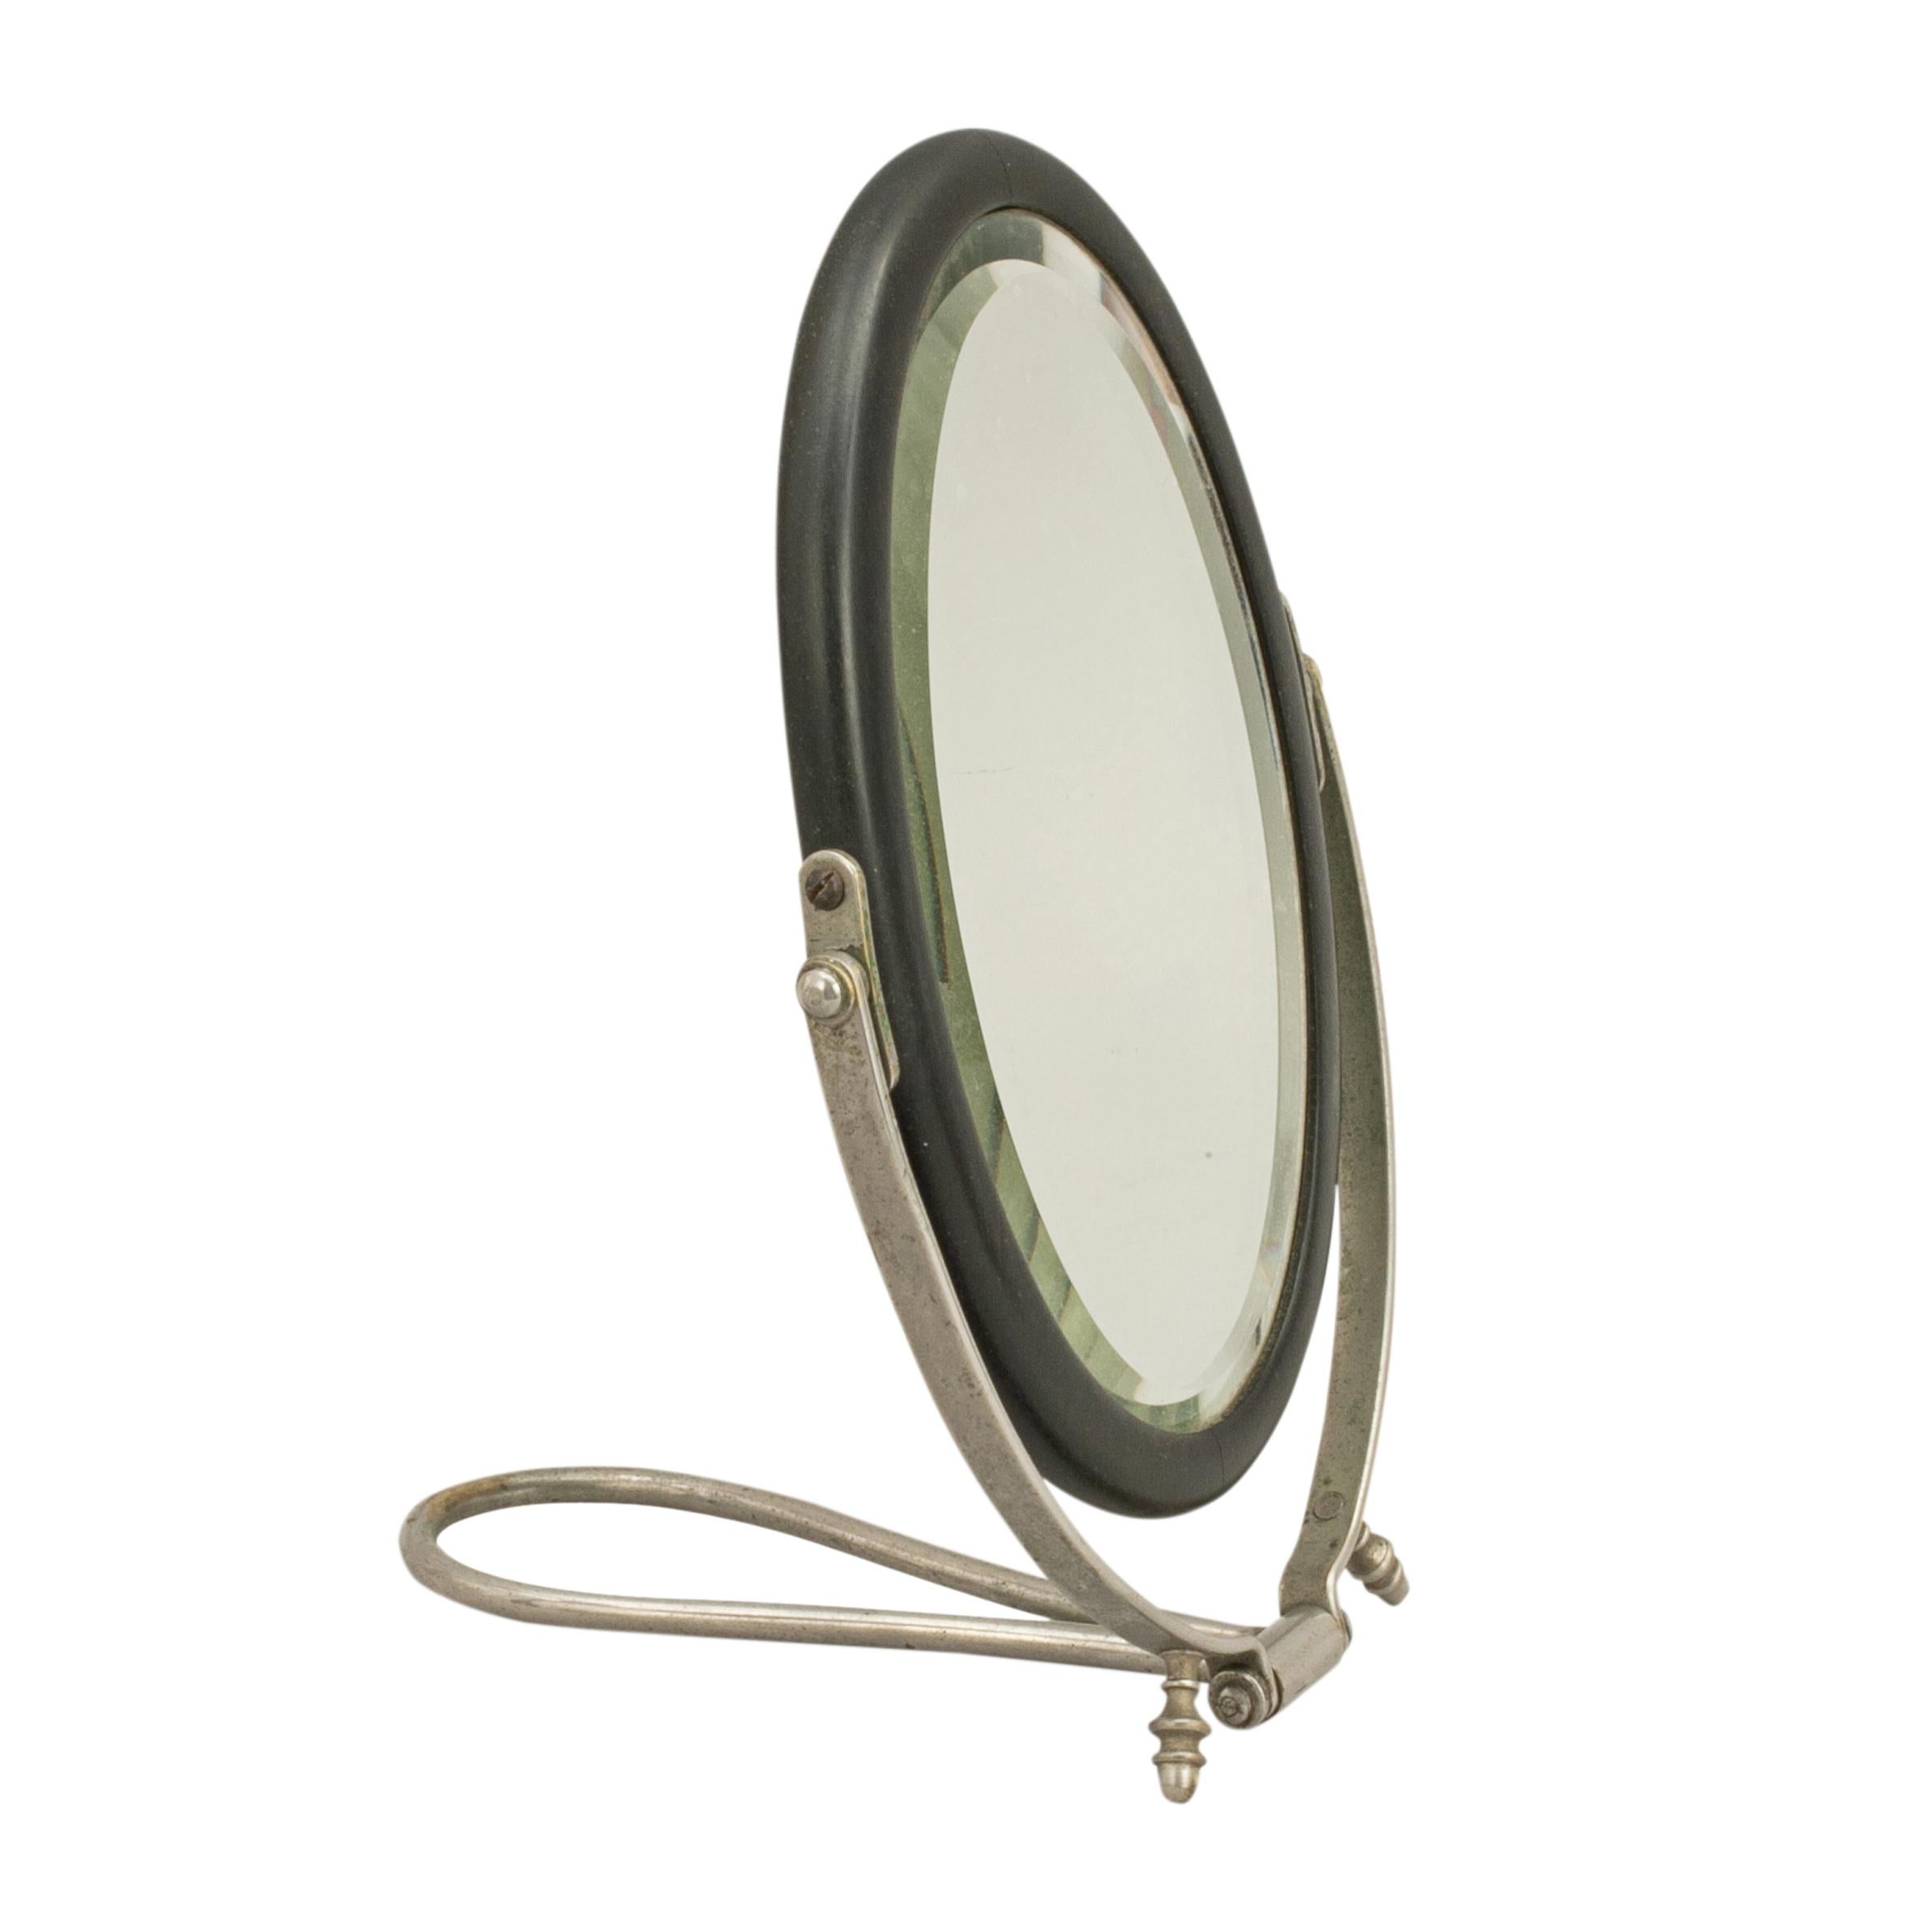 Vintage travellers mirror.
A compact campaign mirror in original travelling leather case. The mirror folds up for easy storage and has a plated metal frame with an ebony cased mirror. The folding travellers mirror is ideal for taking on weekend